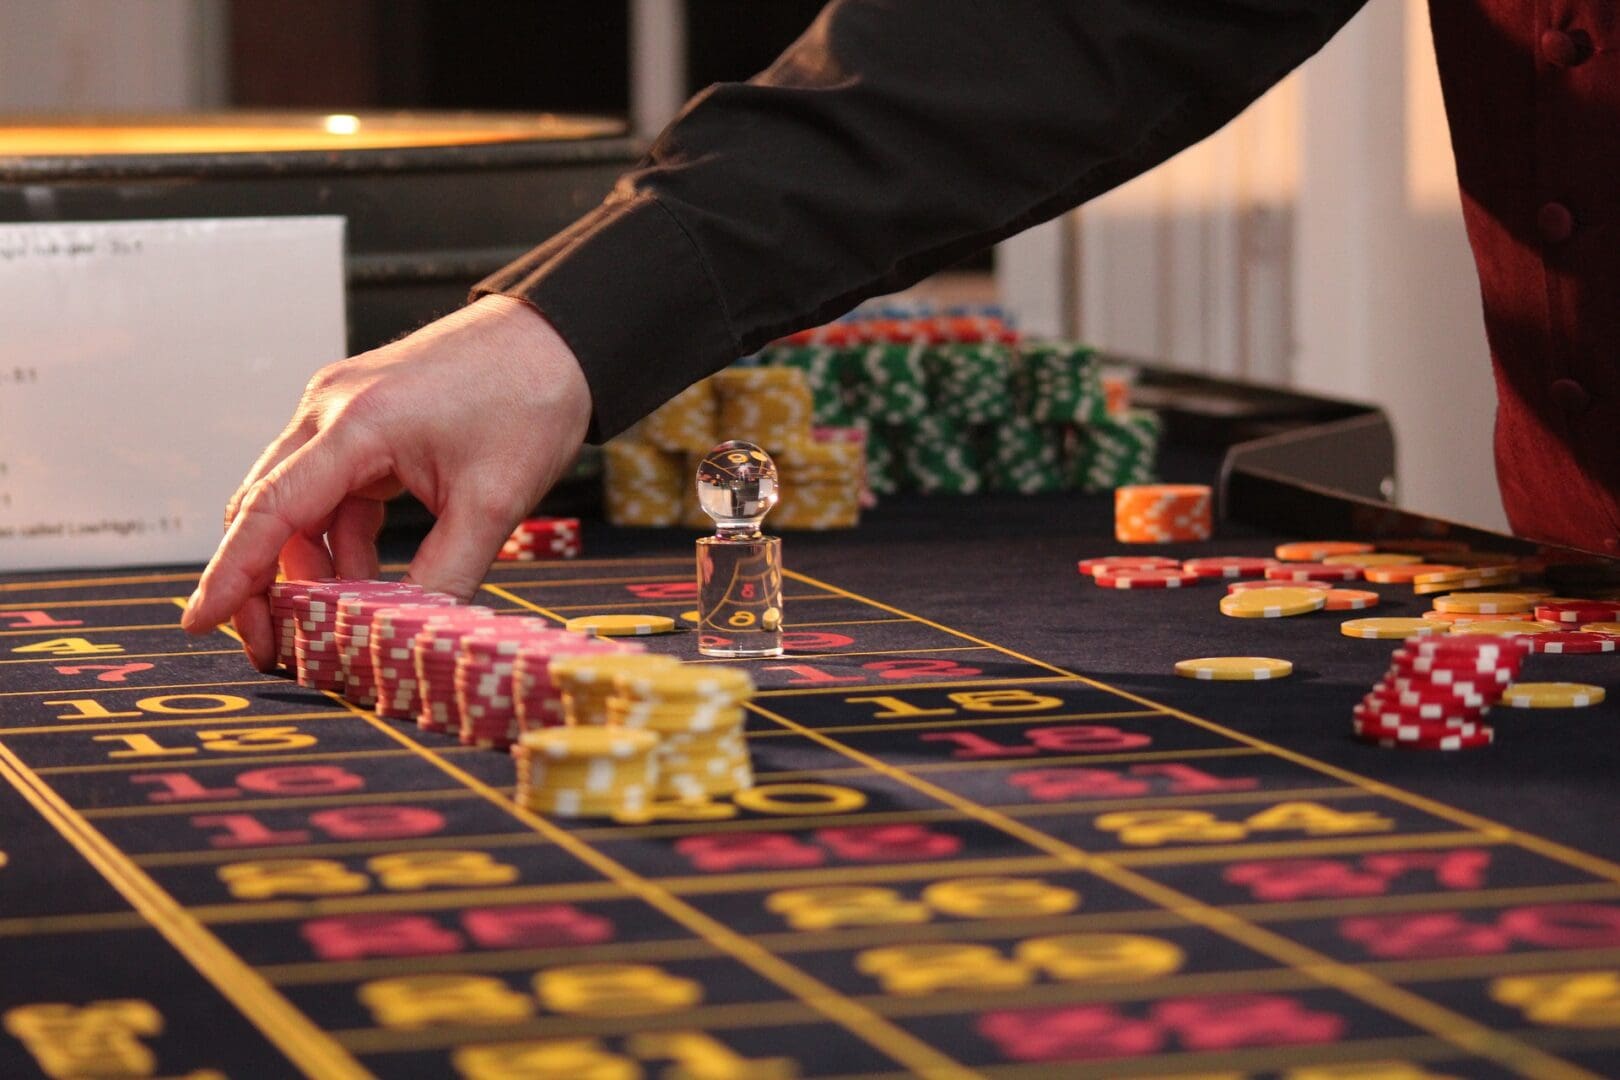 A person is playing roulette on the table.